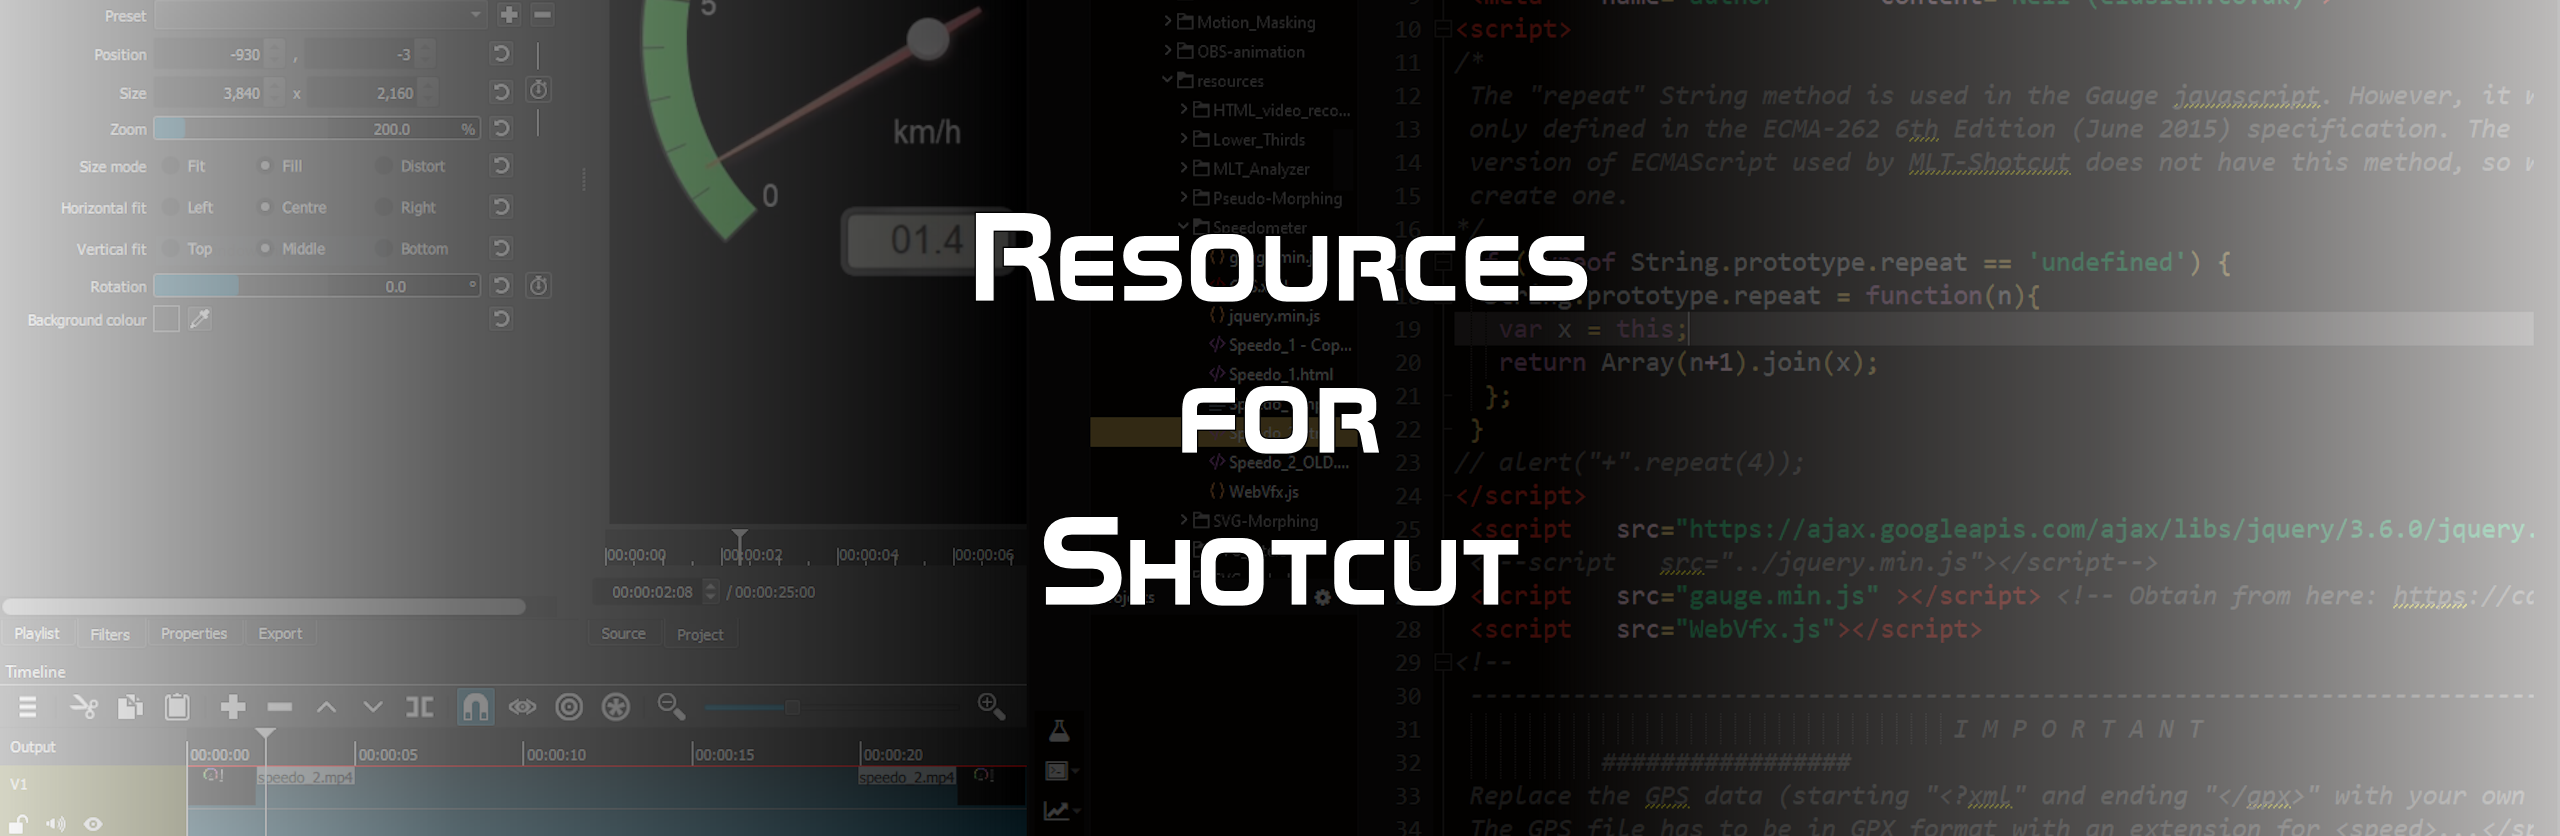 Resources for Shotcut